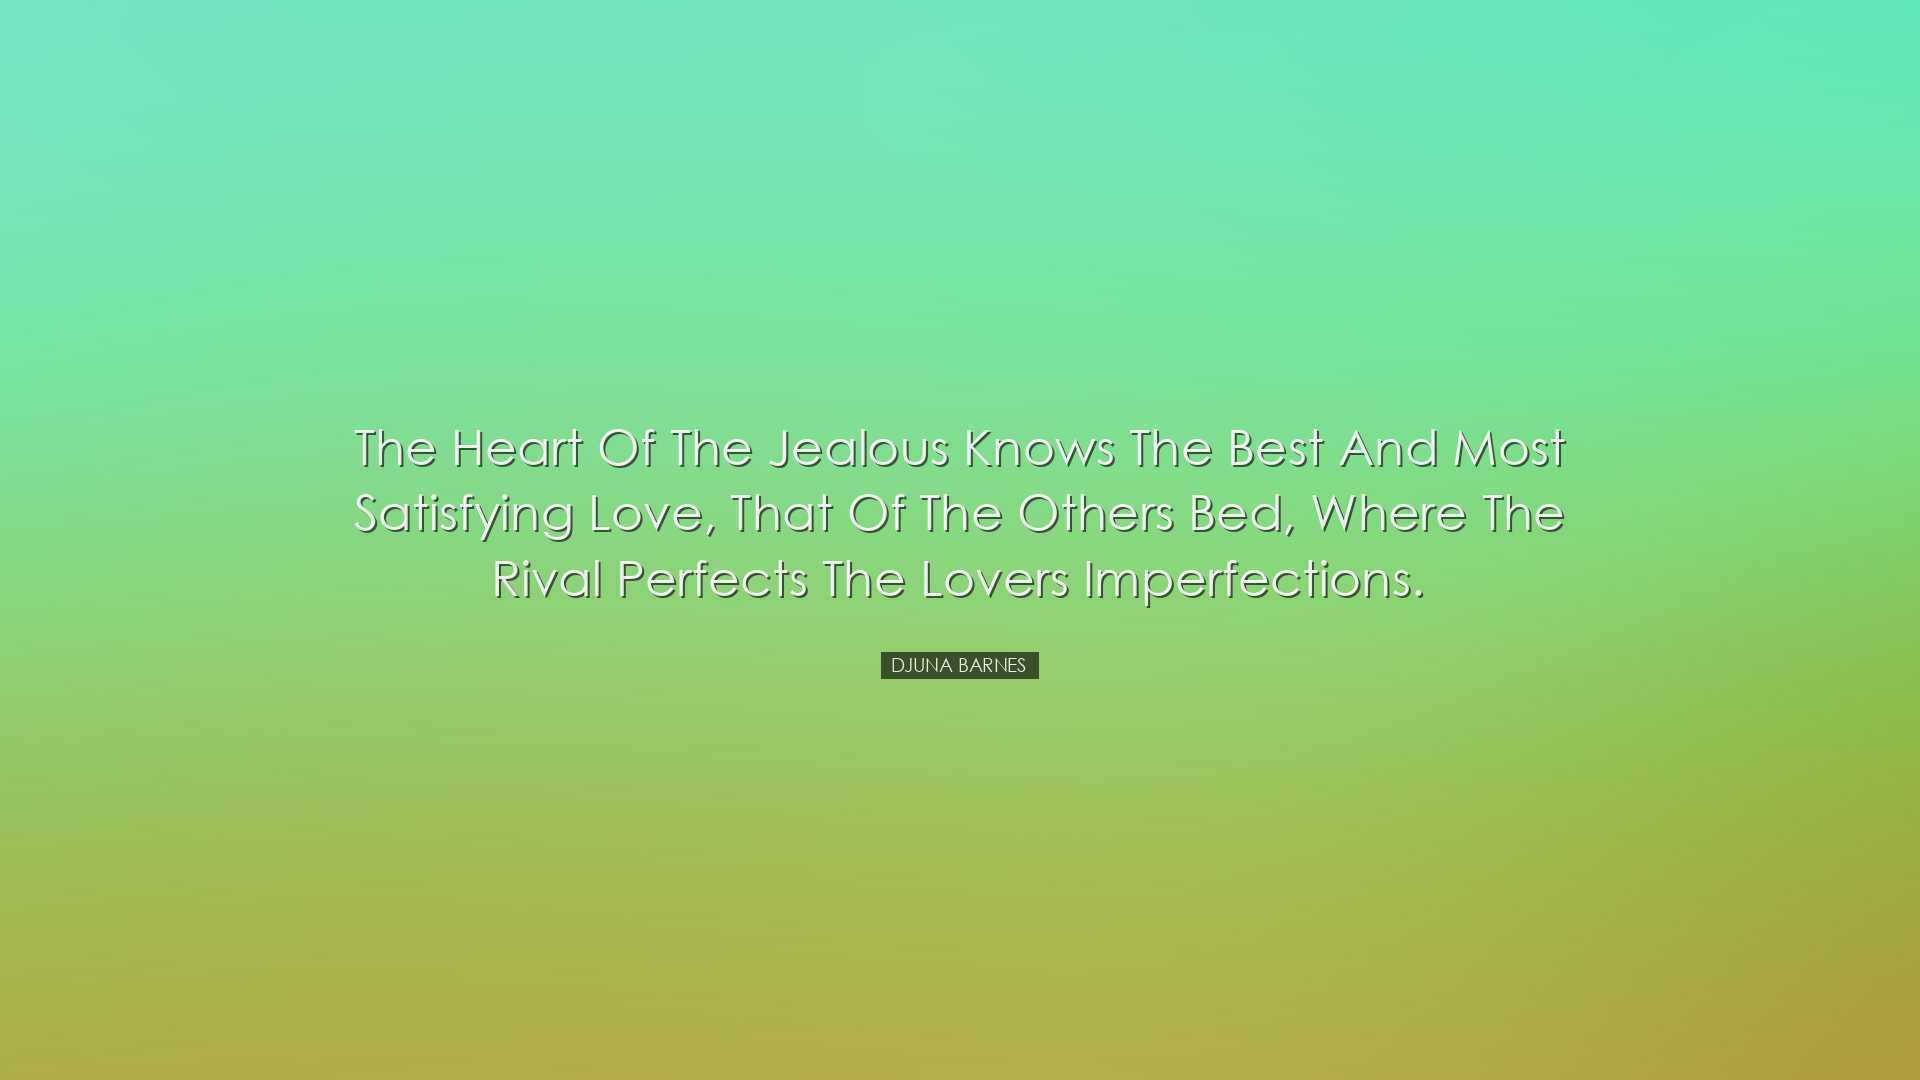 The heart of the jealous knows the best and most satisfying love,